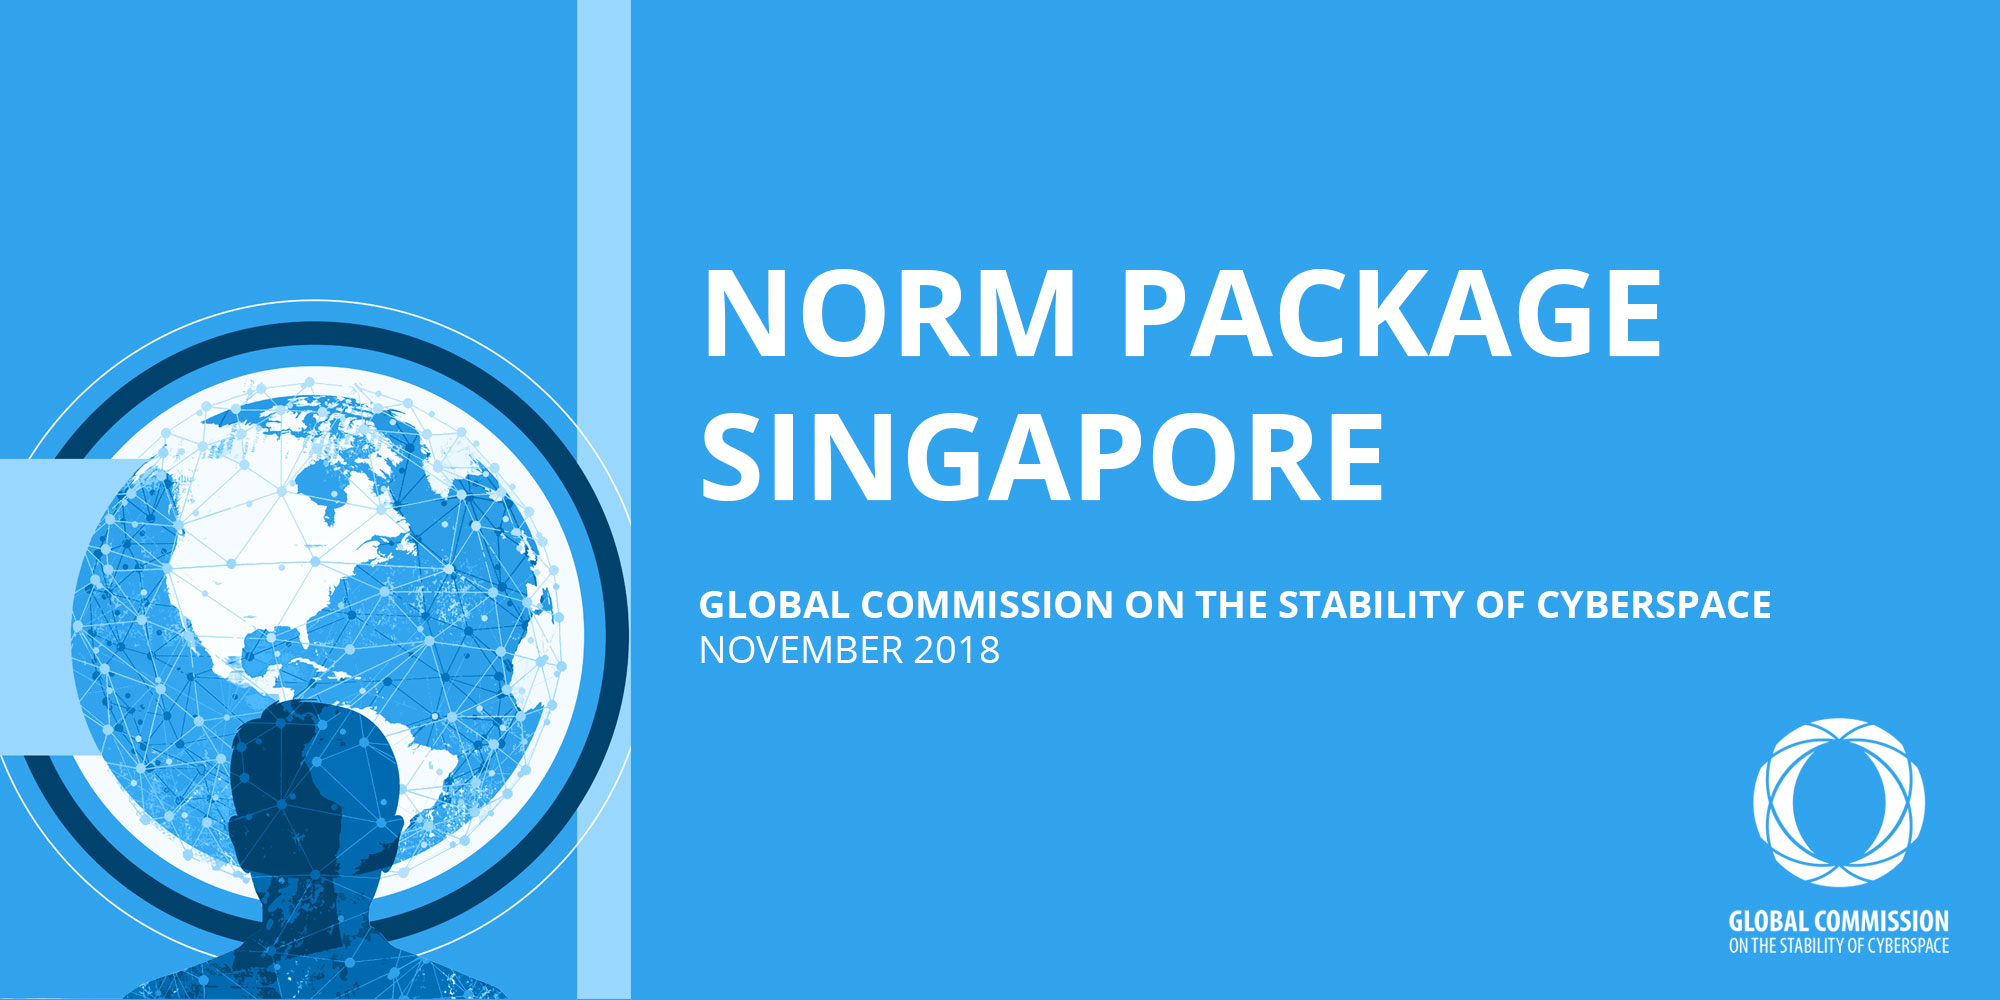 Request for Consultation: Norm Package Singapore [CLOSED]